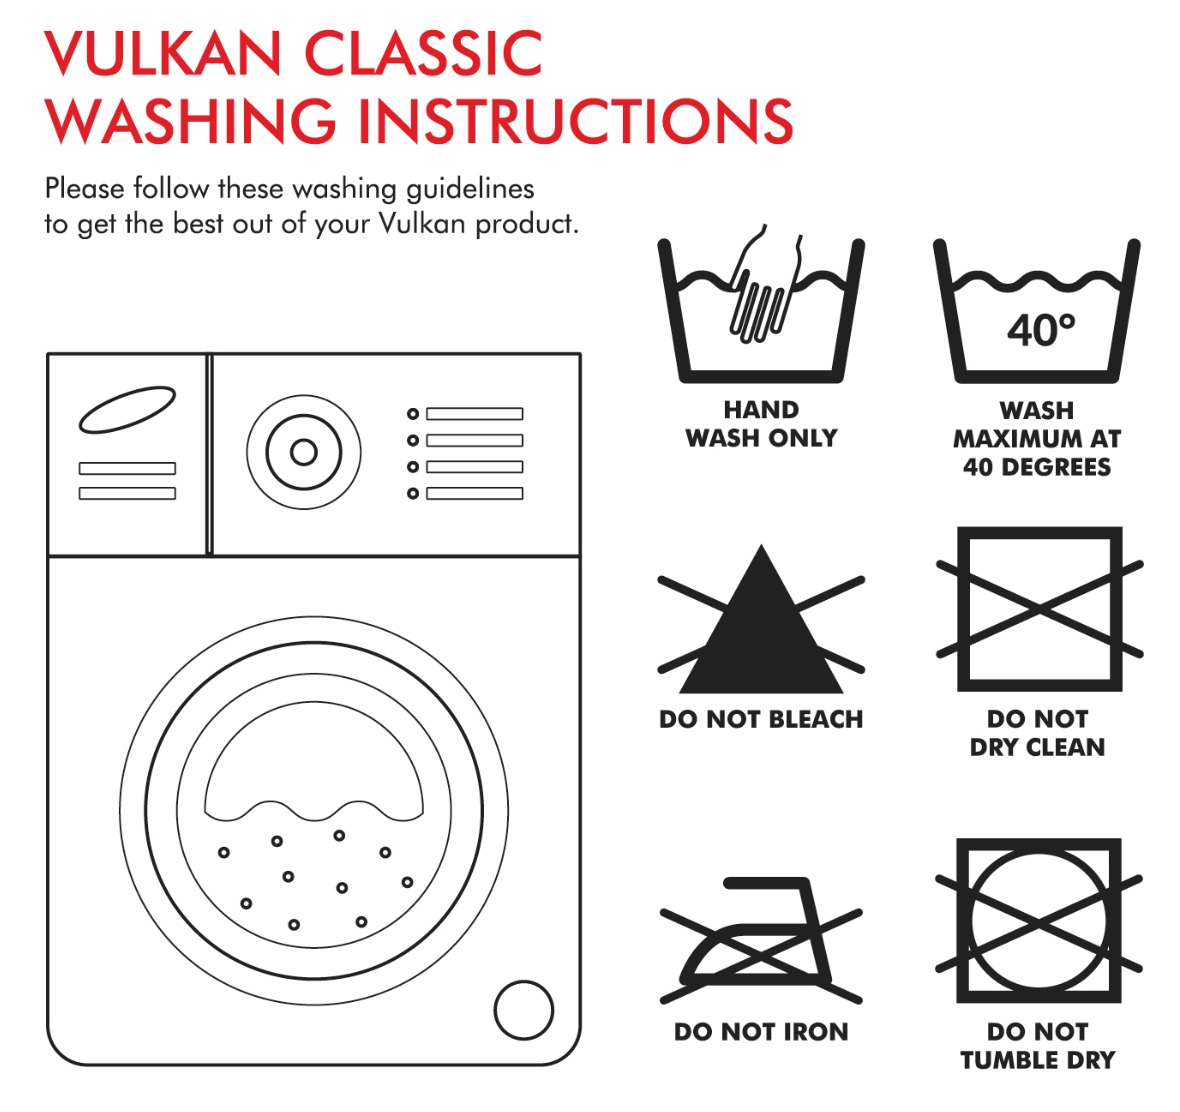 How to correctly wash your Vulkan Knee Brace